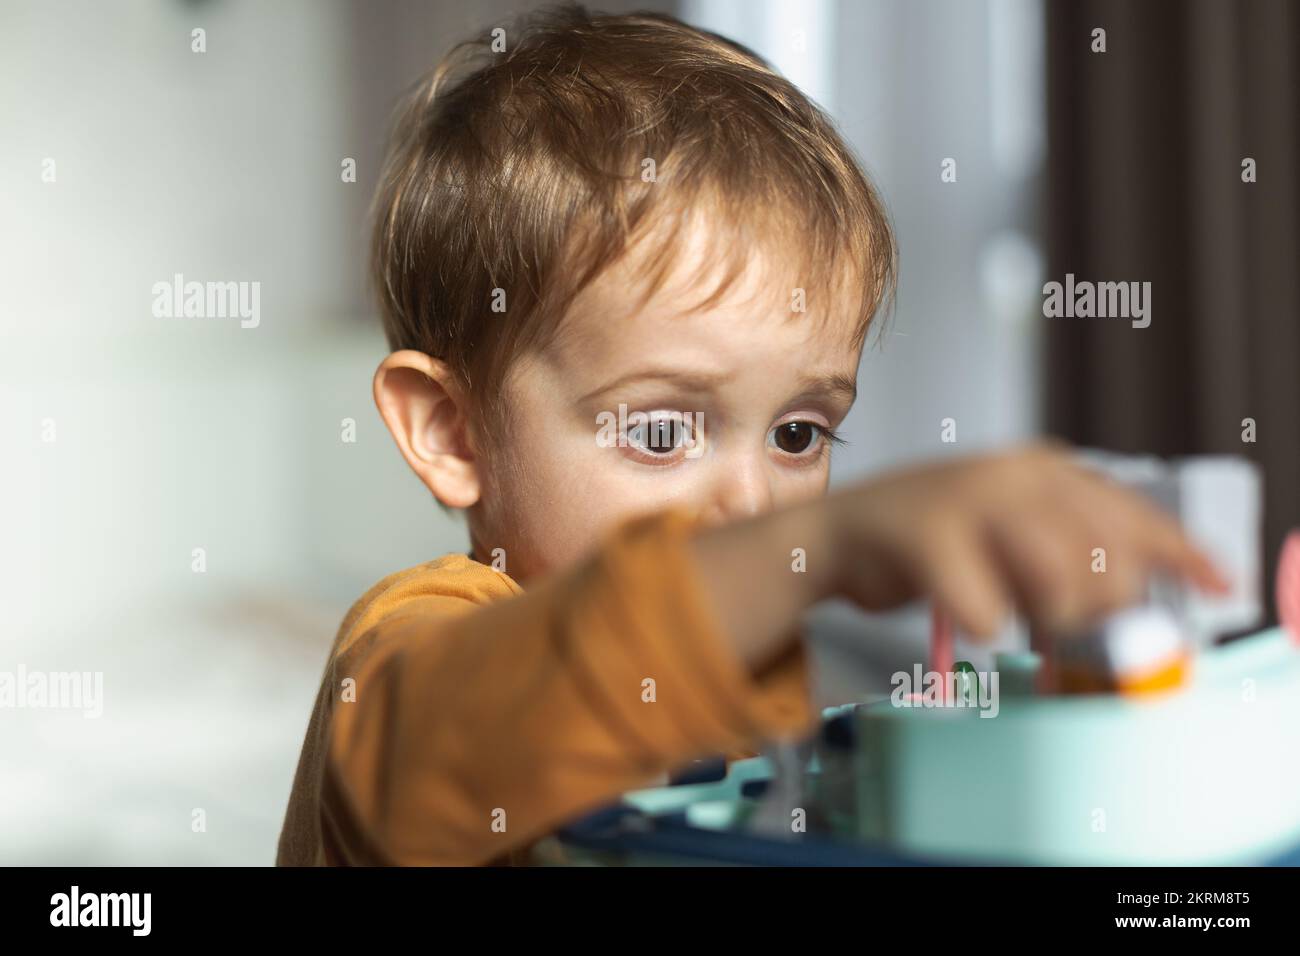 Adorable little blond haired boy in orange sweater sitting at table and playing with toy while spending time at home Stock Photo